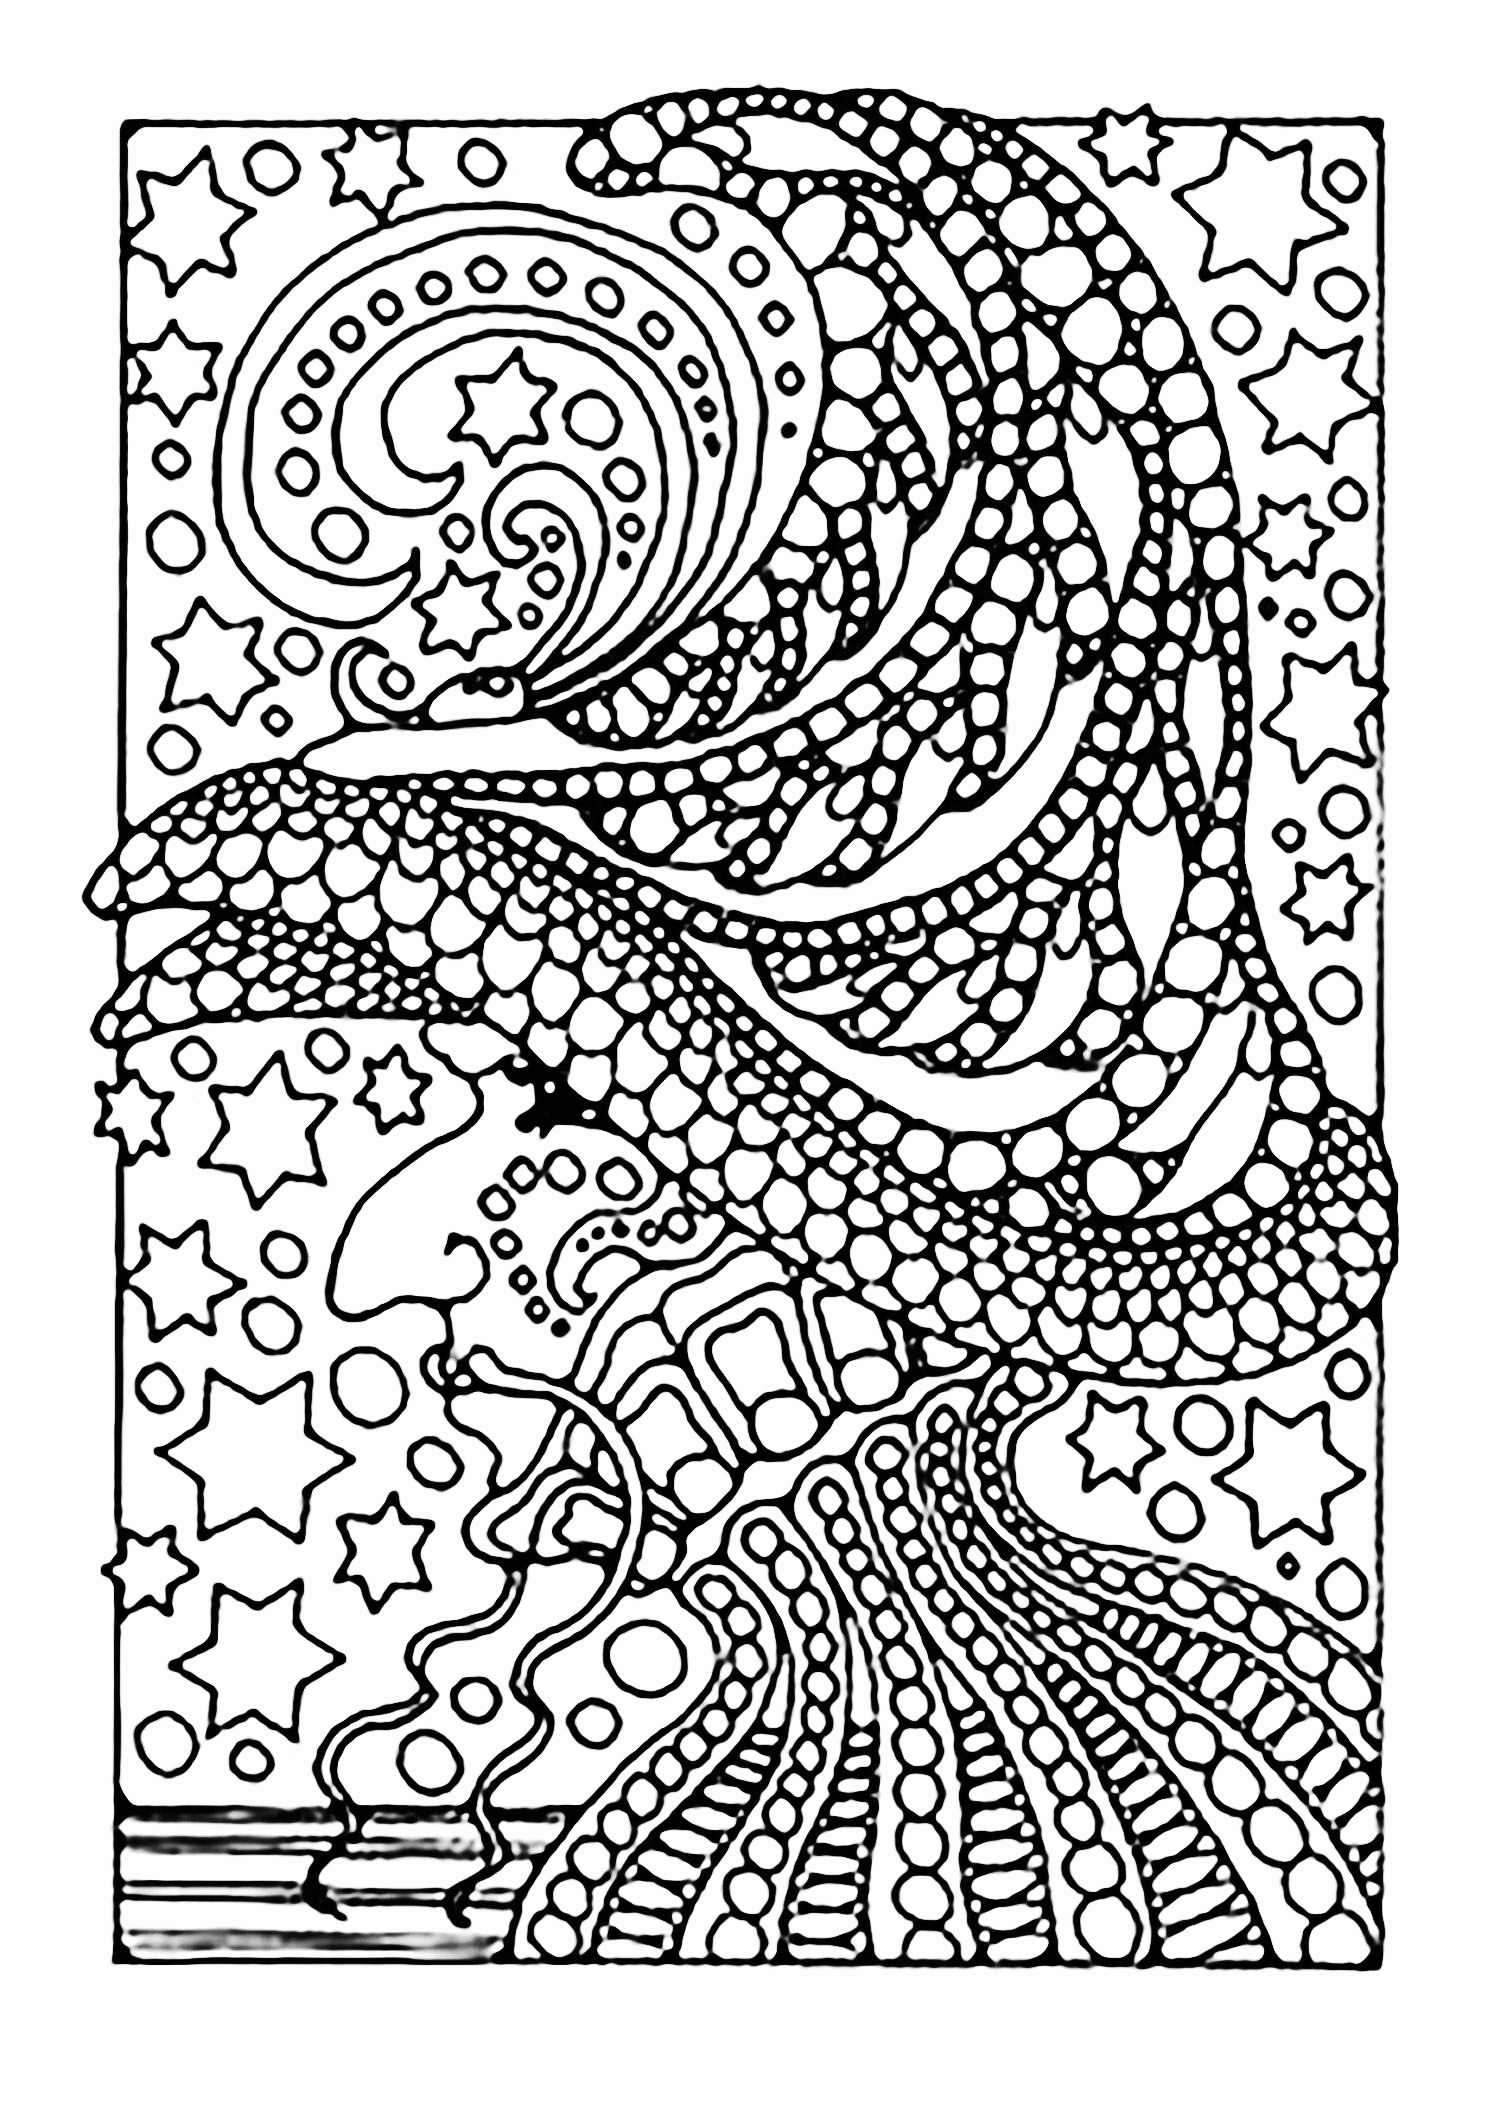 Free Nutrition Worksheets Along with Nutrition Coloring Pages Beautiful 47 Elegant Collection Nutrition